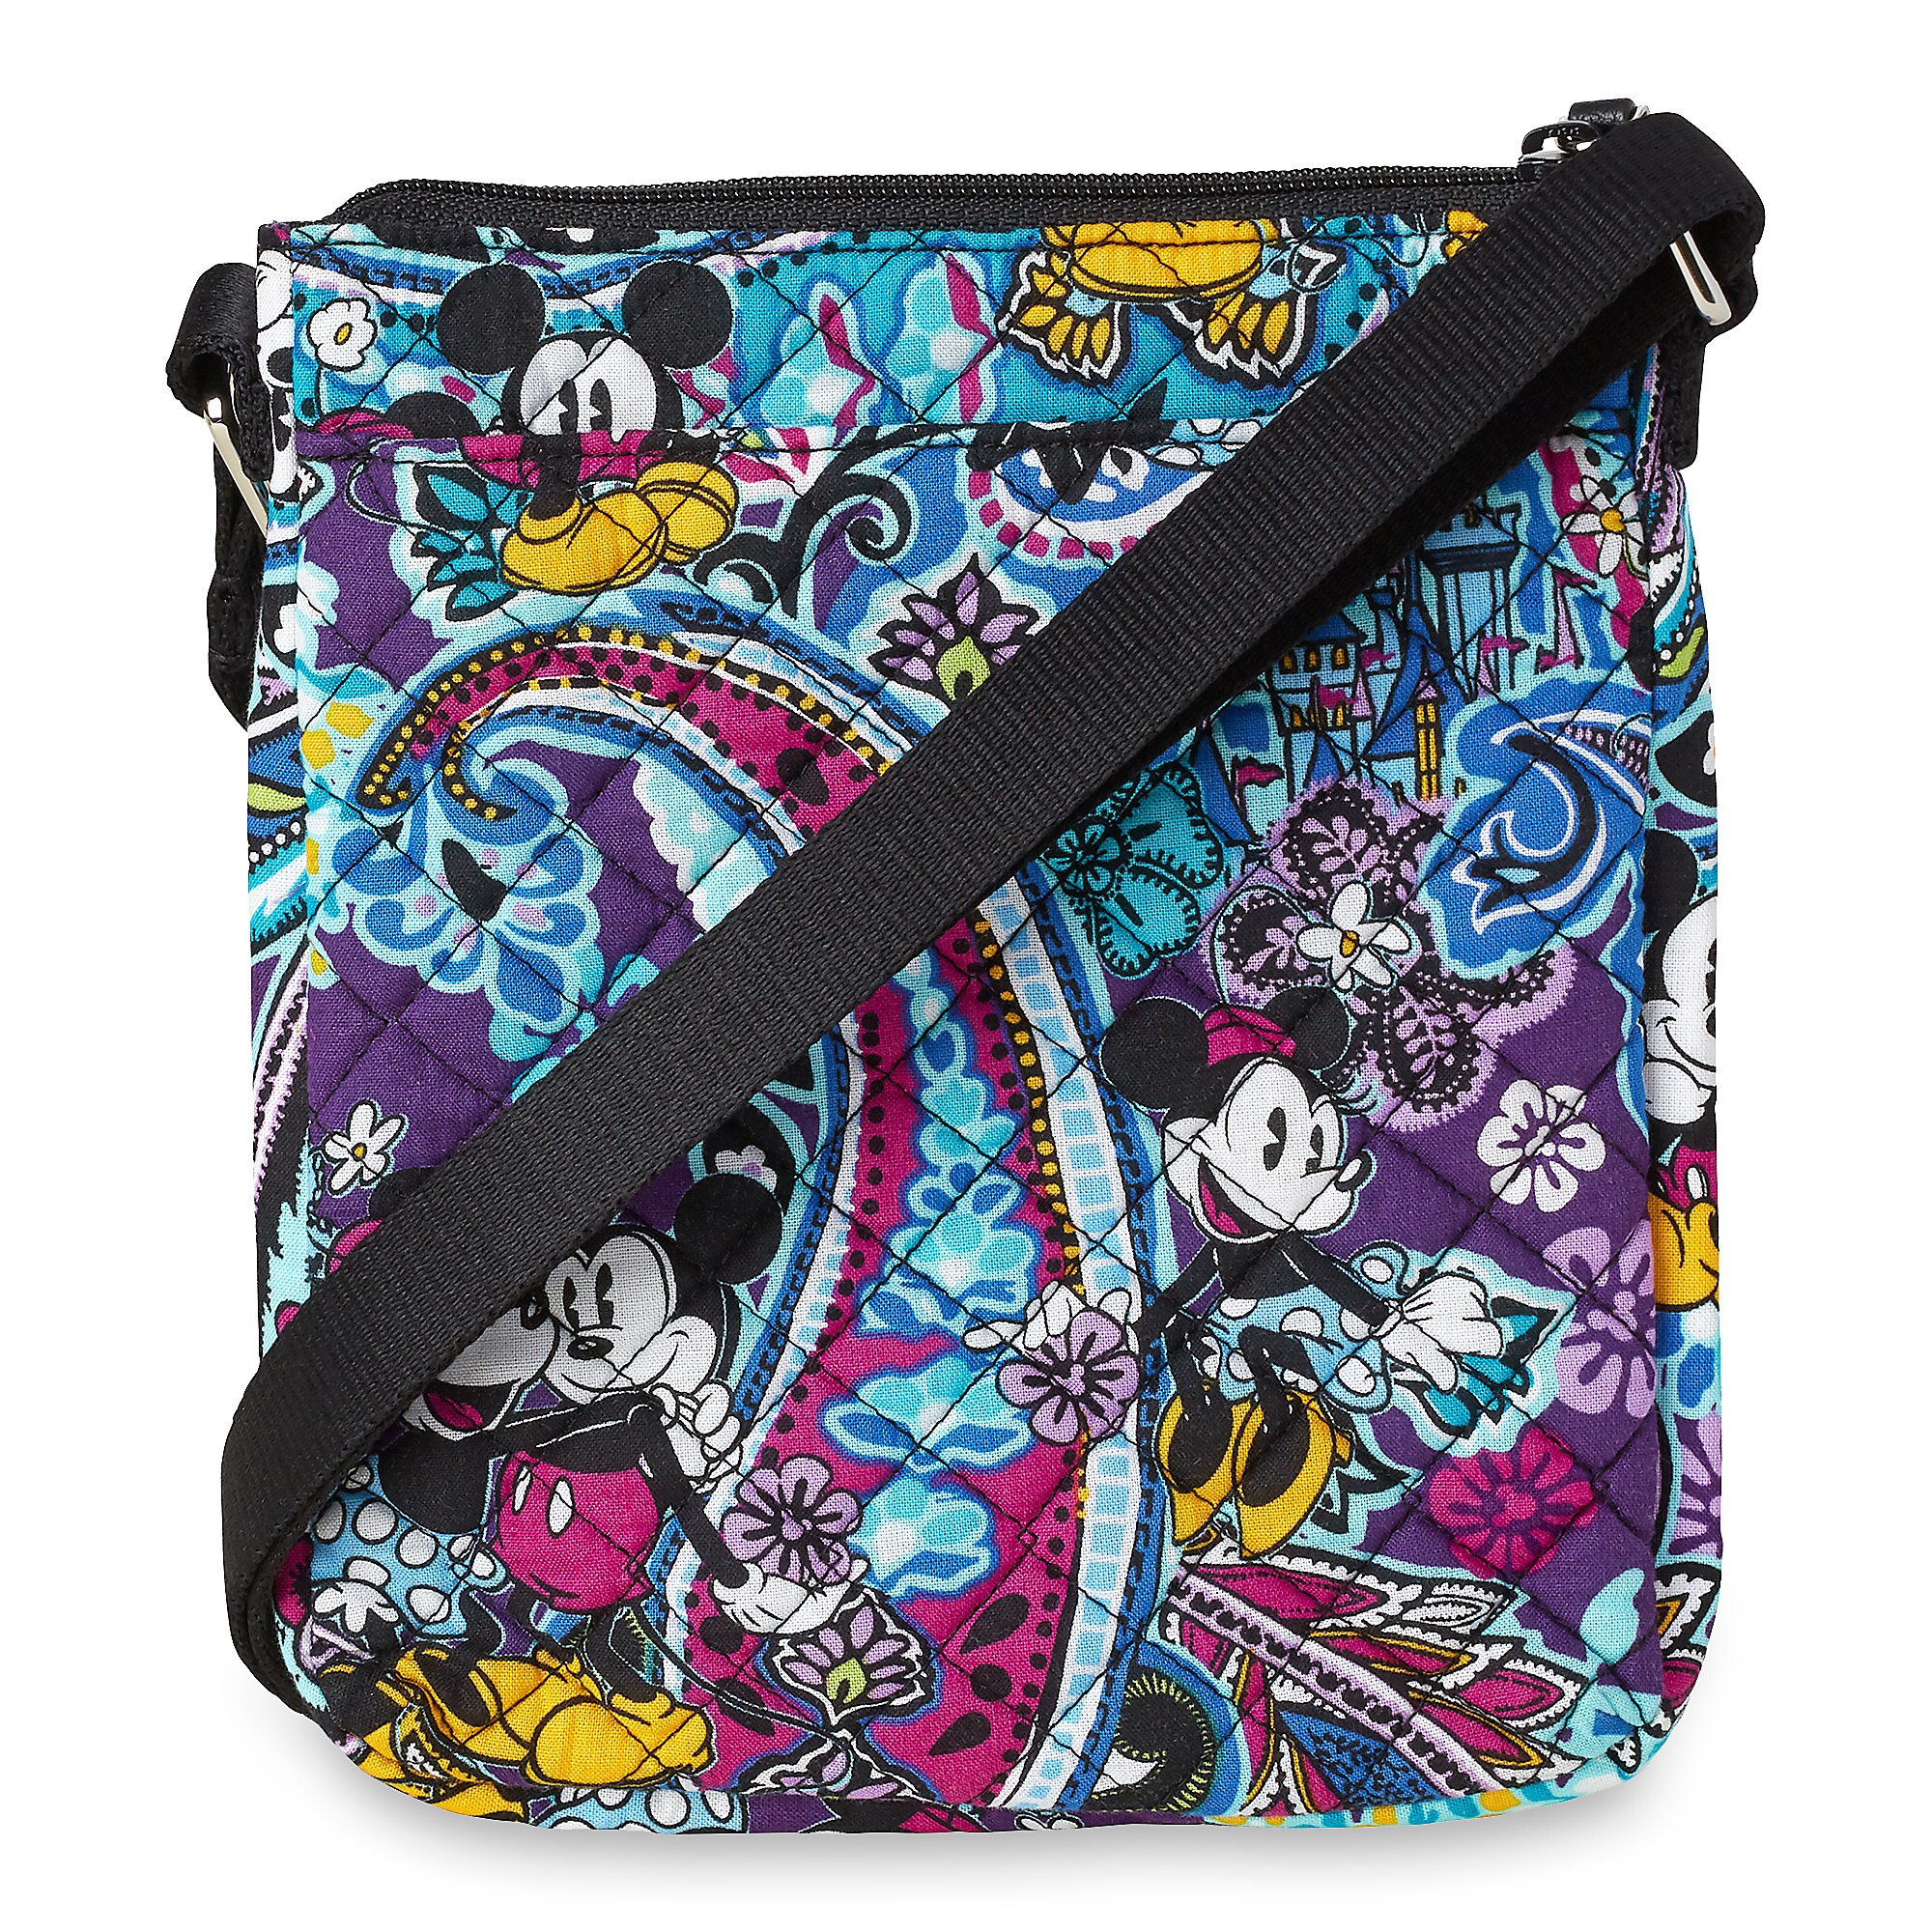 Mickey and Minnie Mouse Paisley Mini Hipster Bag by Vera Bradley